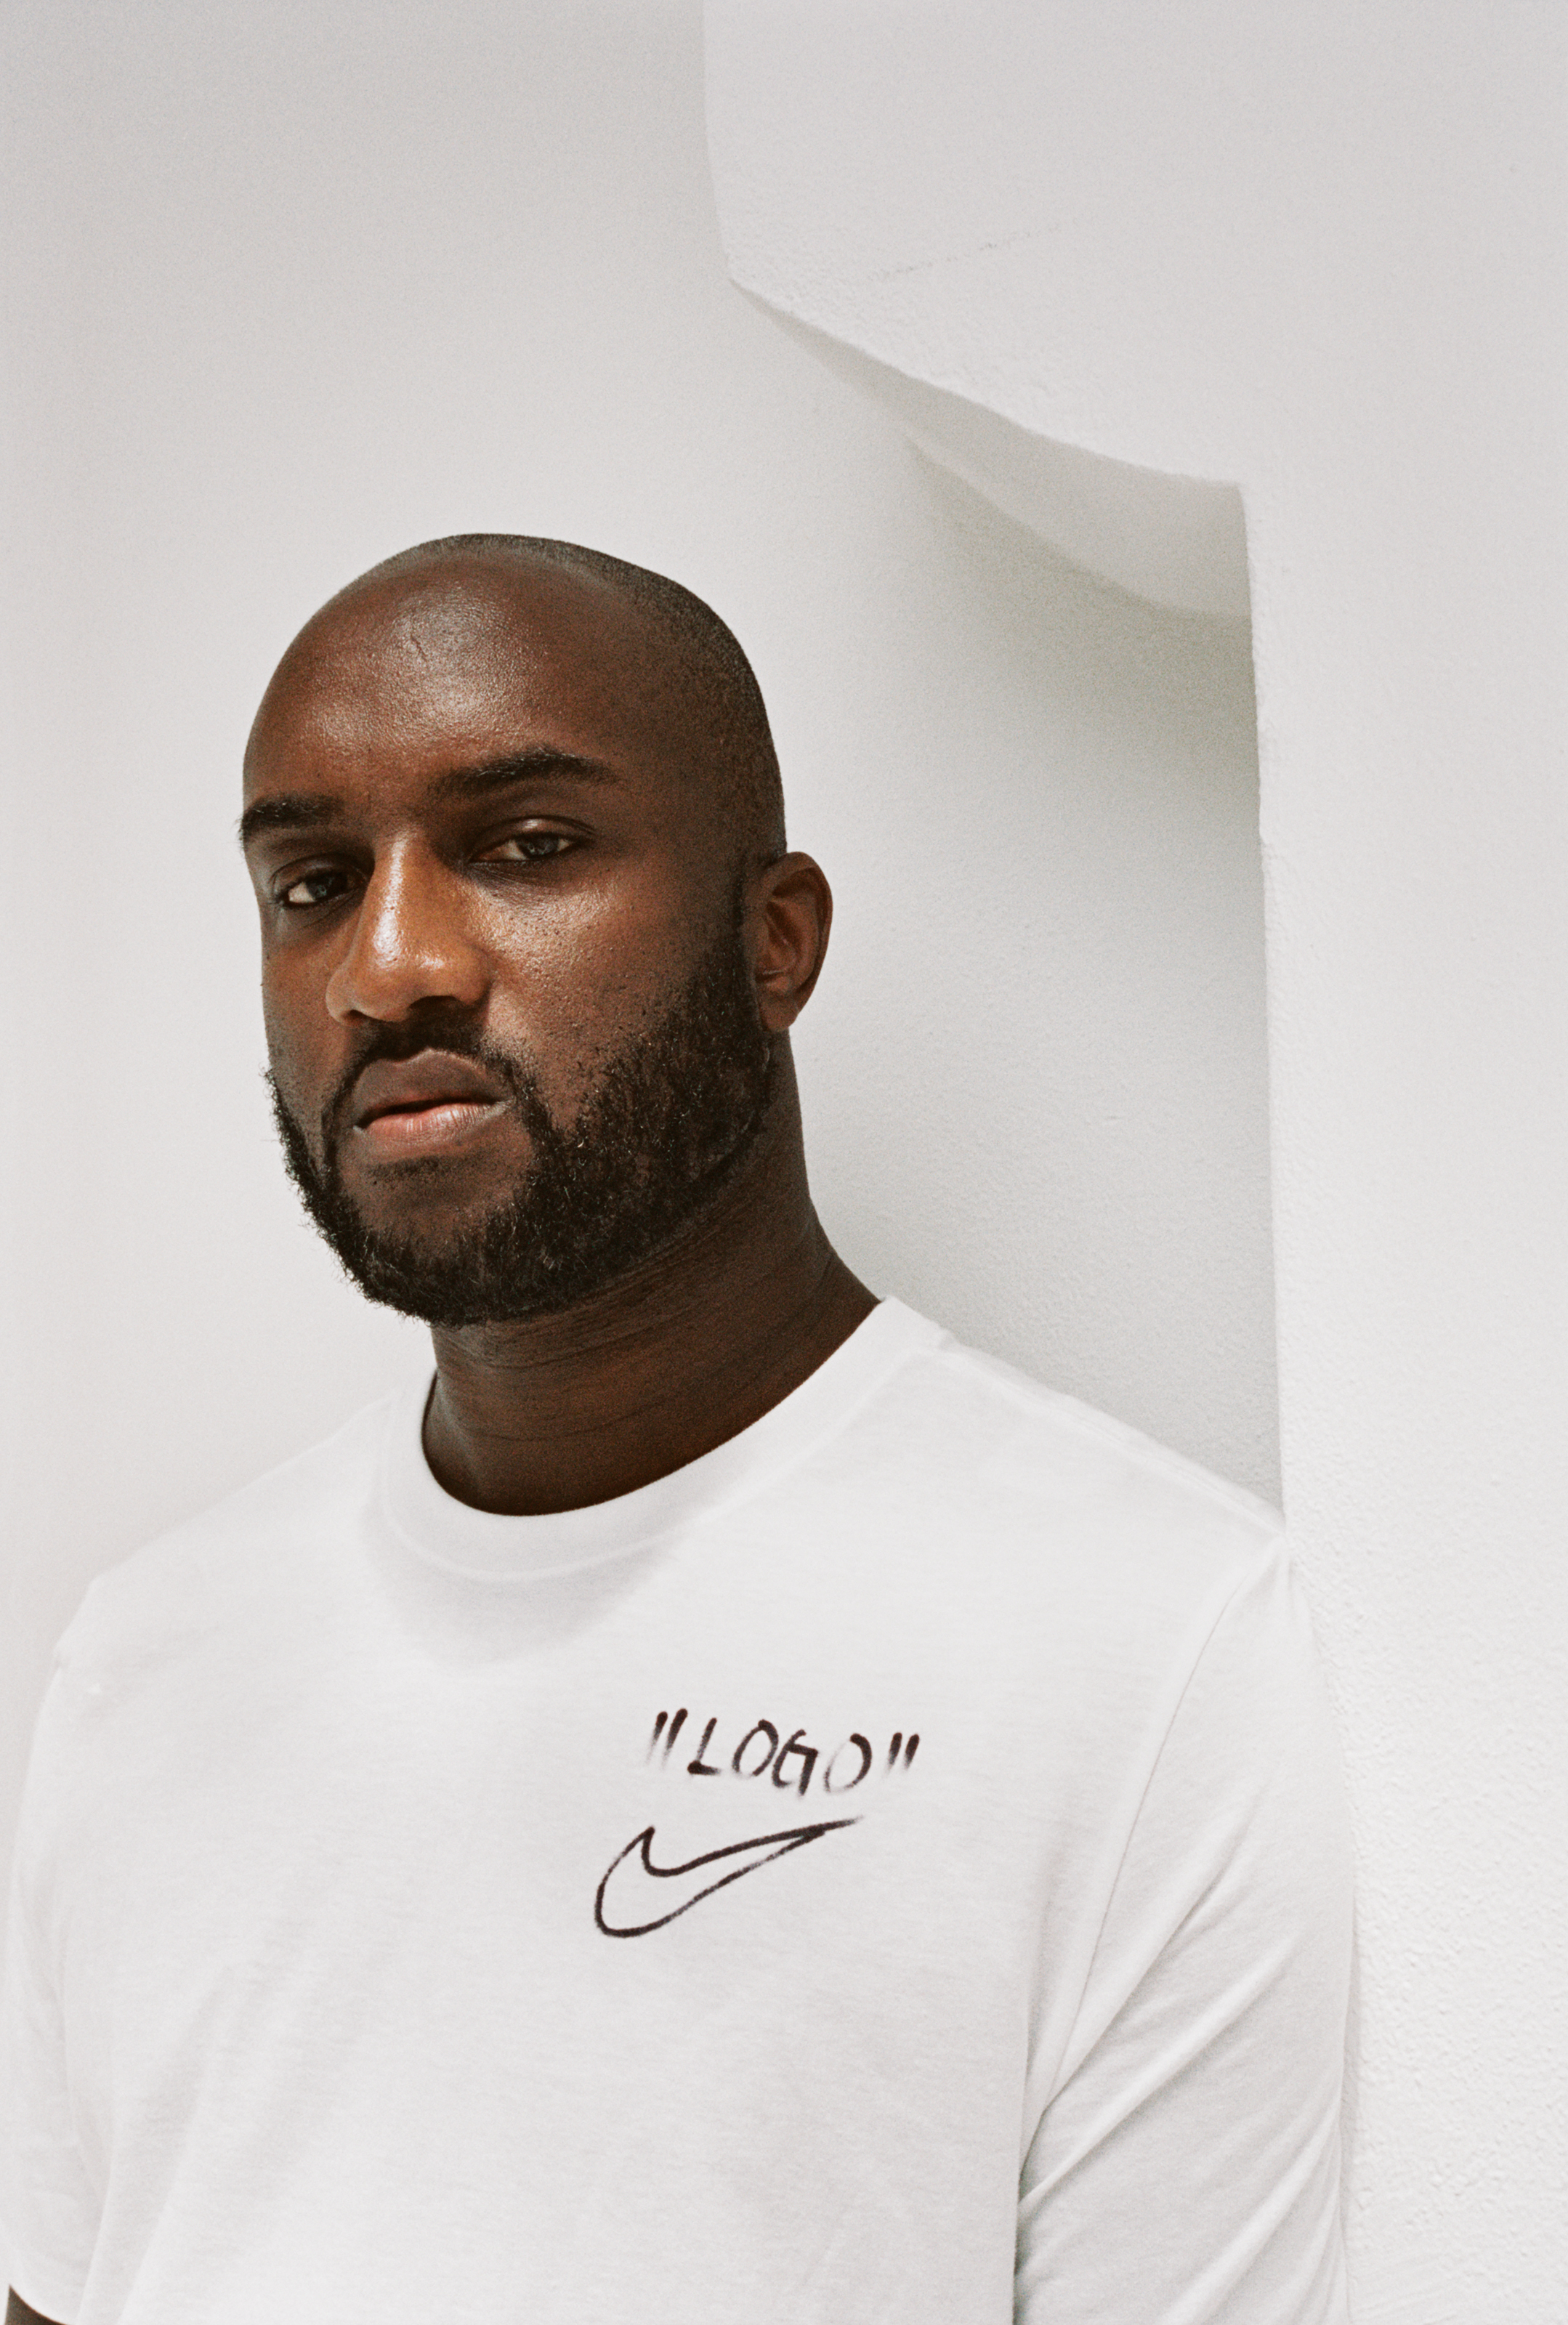 Fashion Pioneer Virgil Abloh Helped Create These Legendary Album Covers